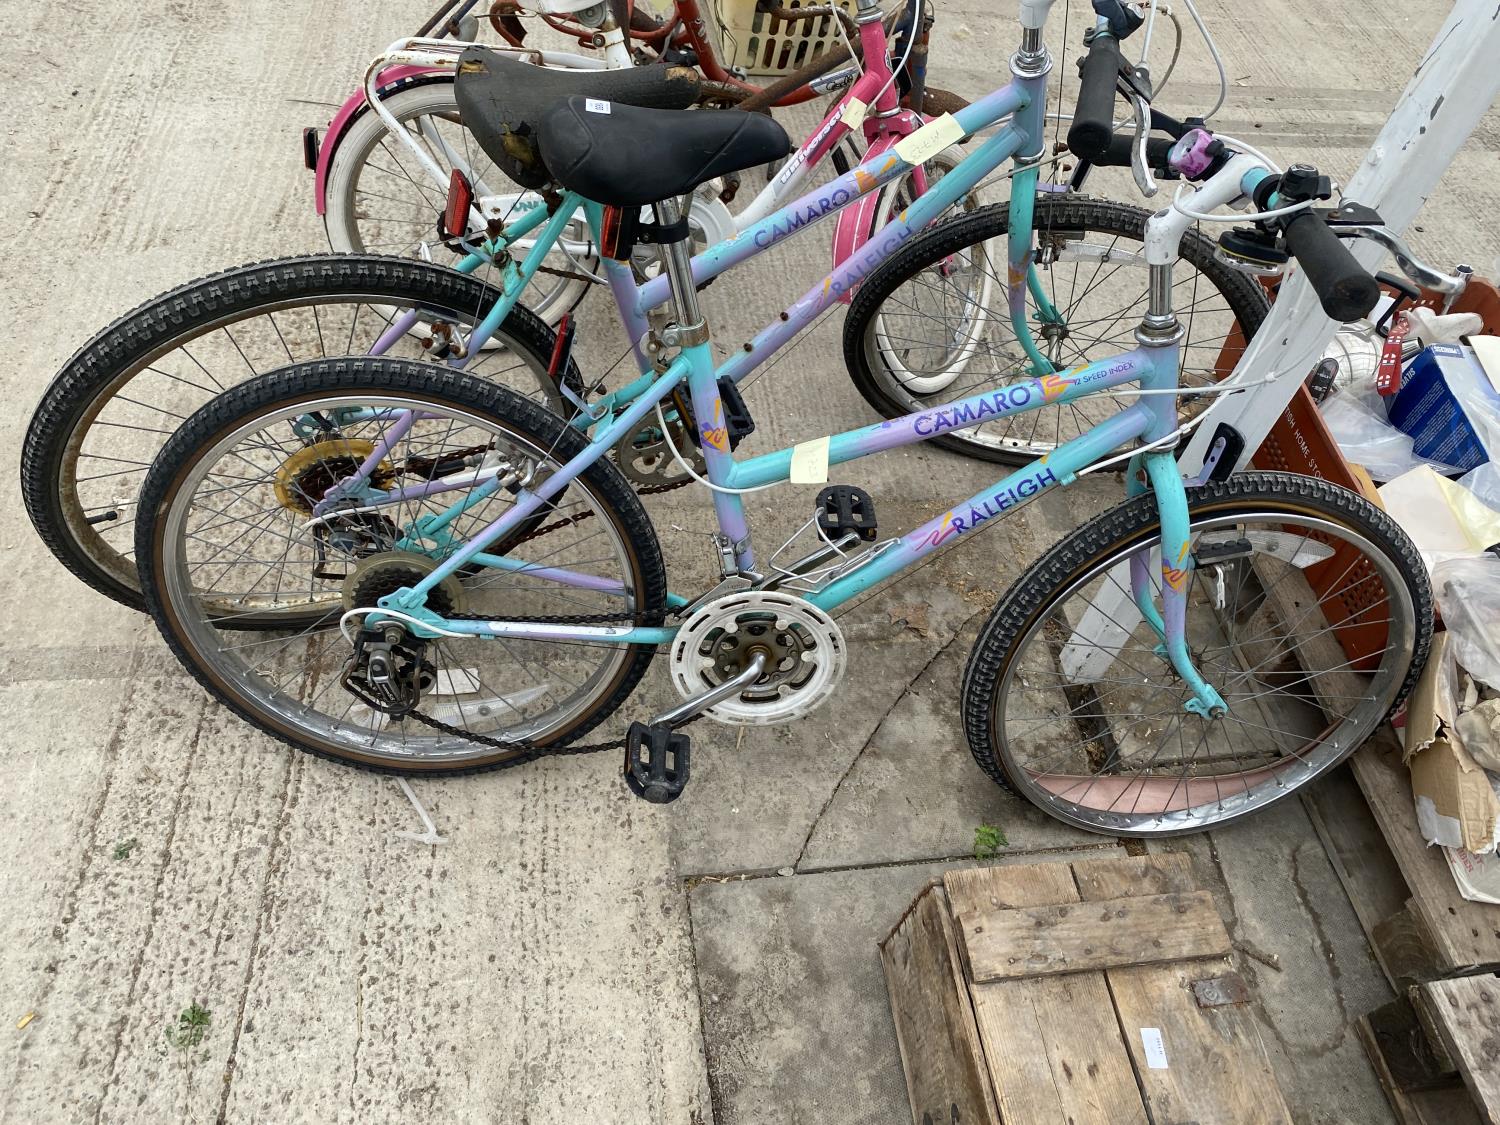 A COLLECTION OF CHILDRENS BIKES AND BIKE PARTS - Image 3 of 5